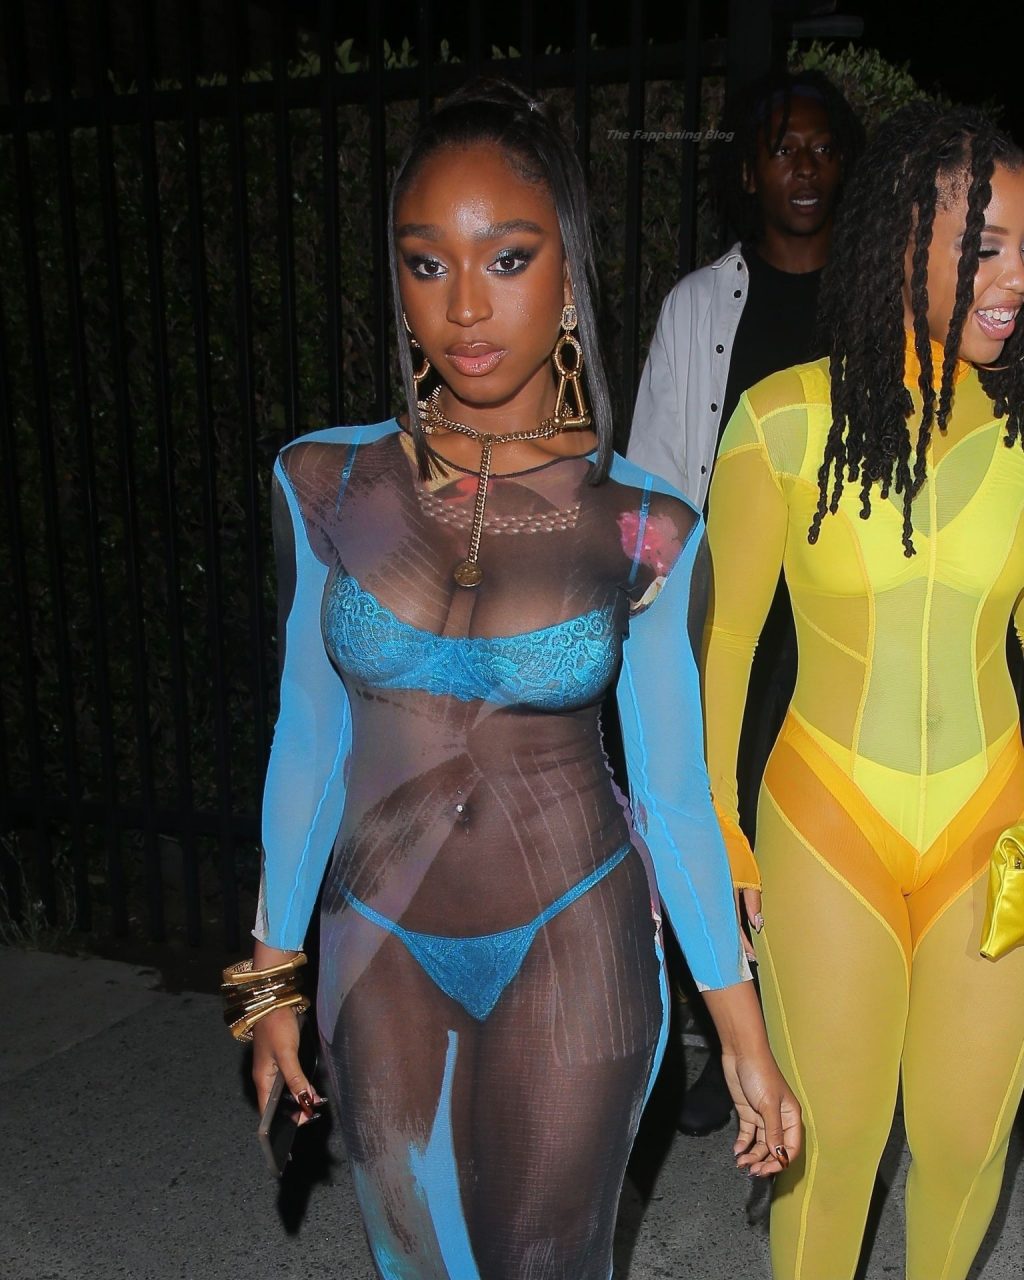 Normani &amp; Chloe Look Stunning as They Leave Doja Cat’s Album Release Party (33 Photos + Video)